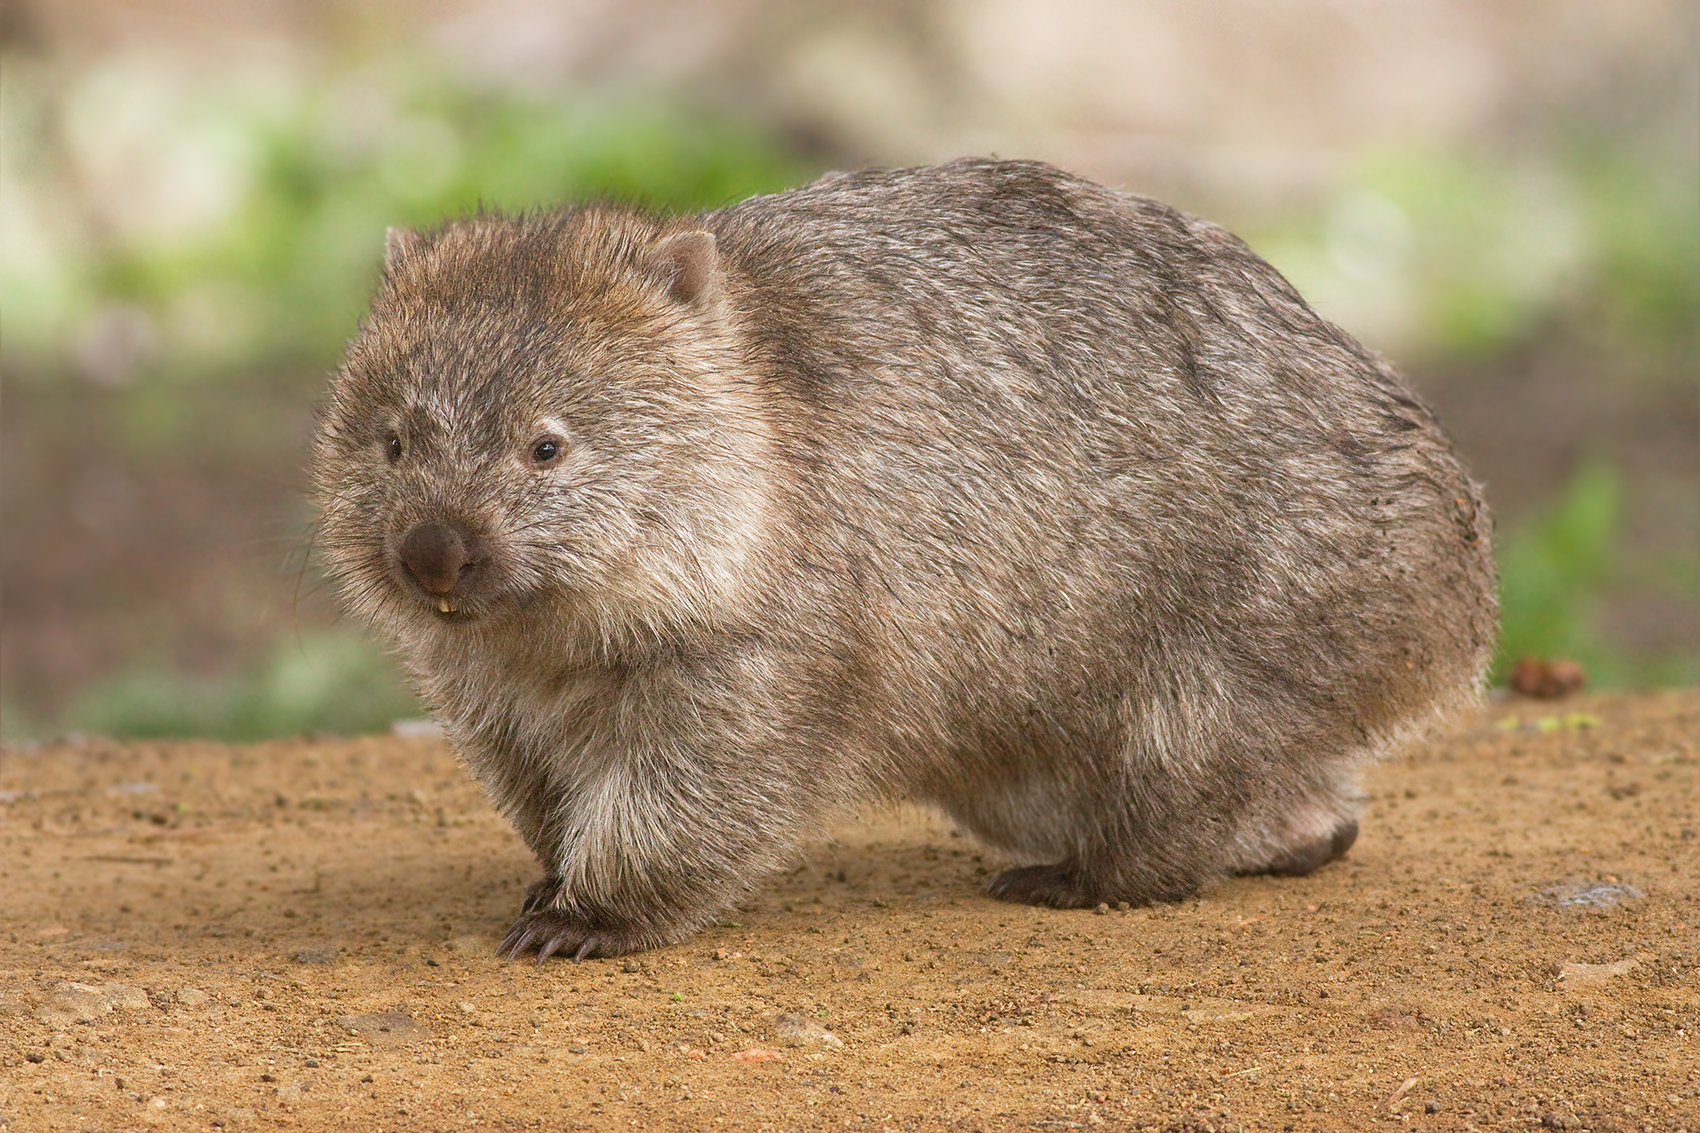 The common wombat (Vombatus ursinus). (JJ Harrison/Wikipedia/<a href="https://theconversation.com/meet-the-giant-wombat-relative-that-scratched-out-a-living-in-australia-25-million-years-ago-141296">CC BY-SA 3.0</a>)